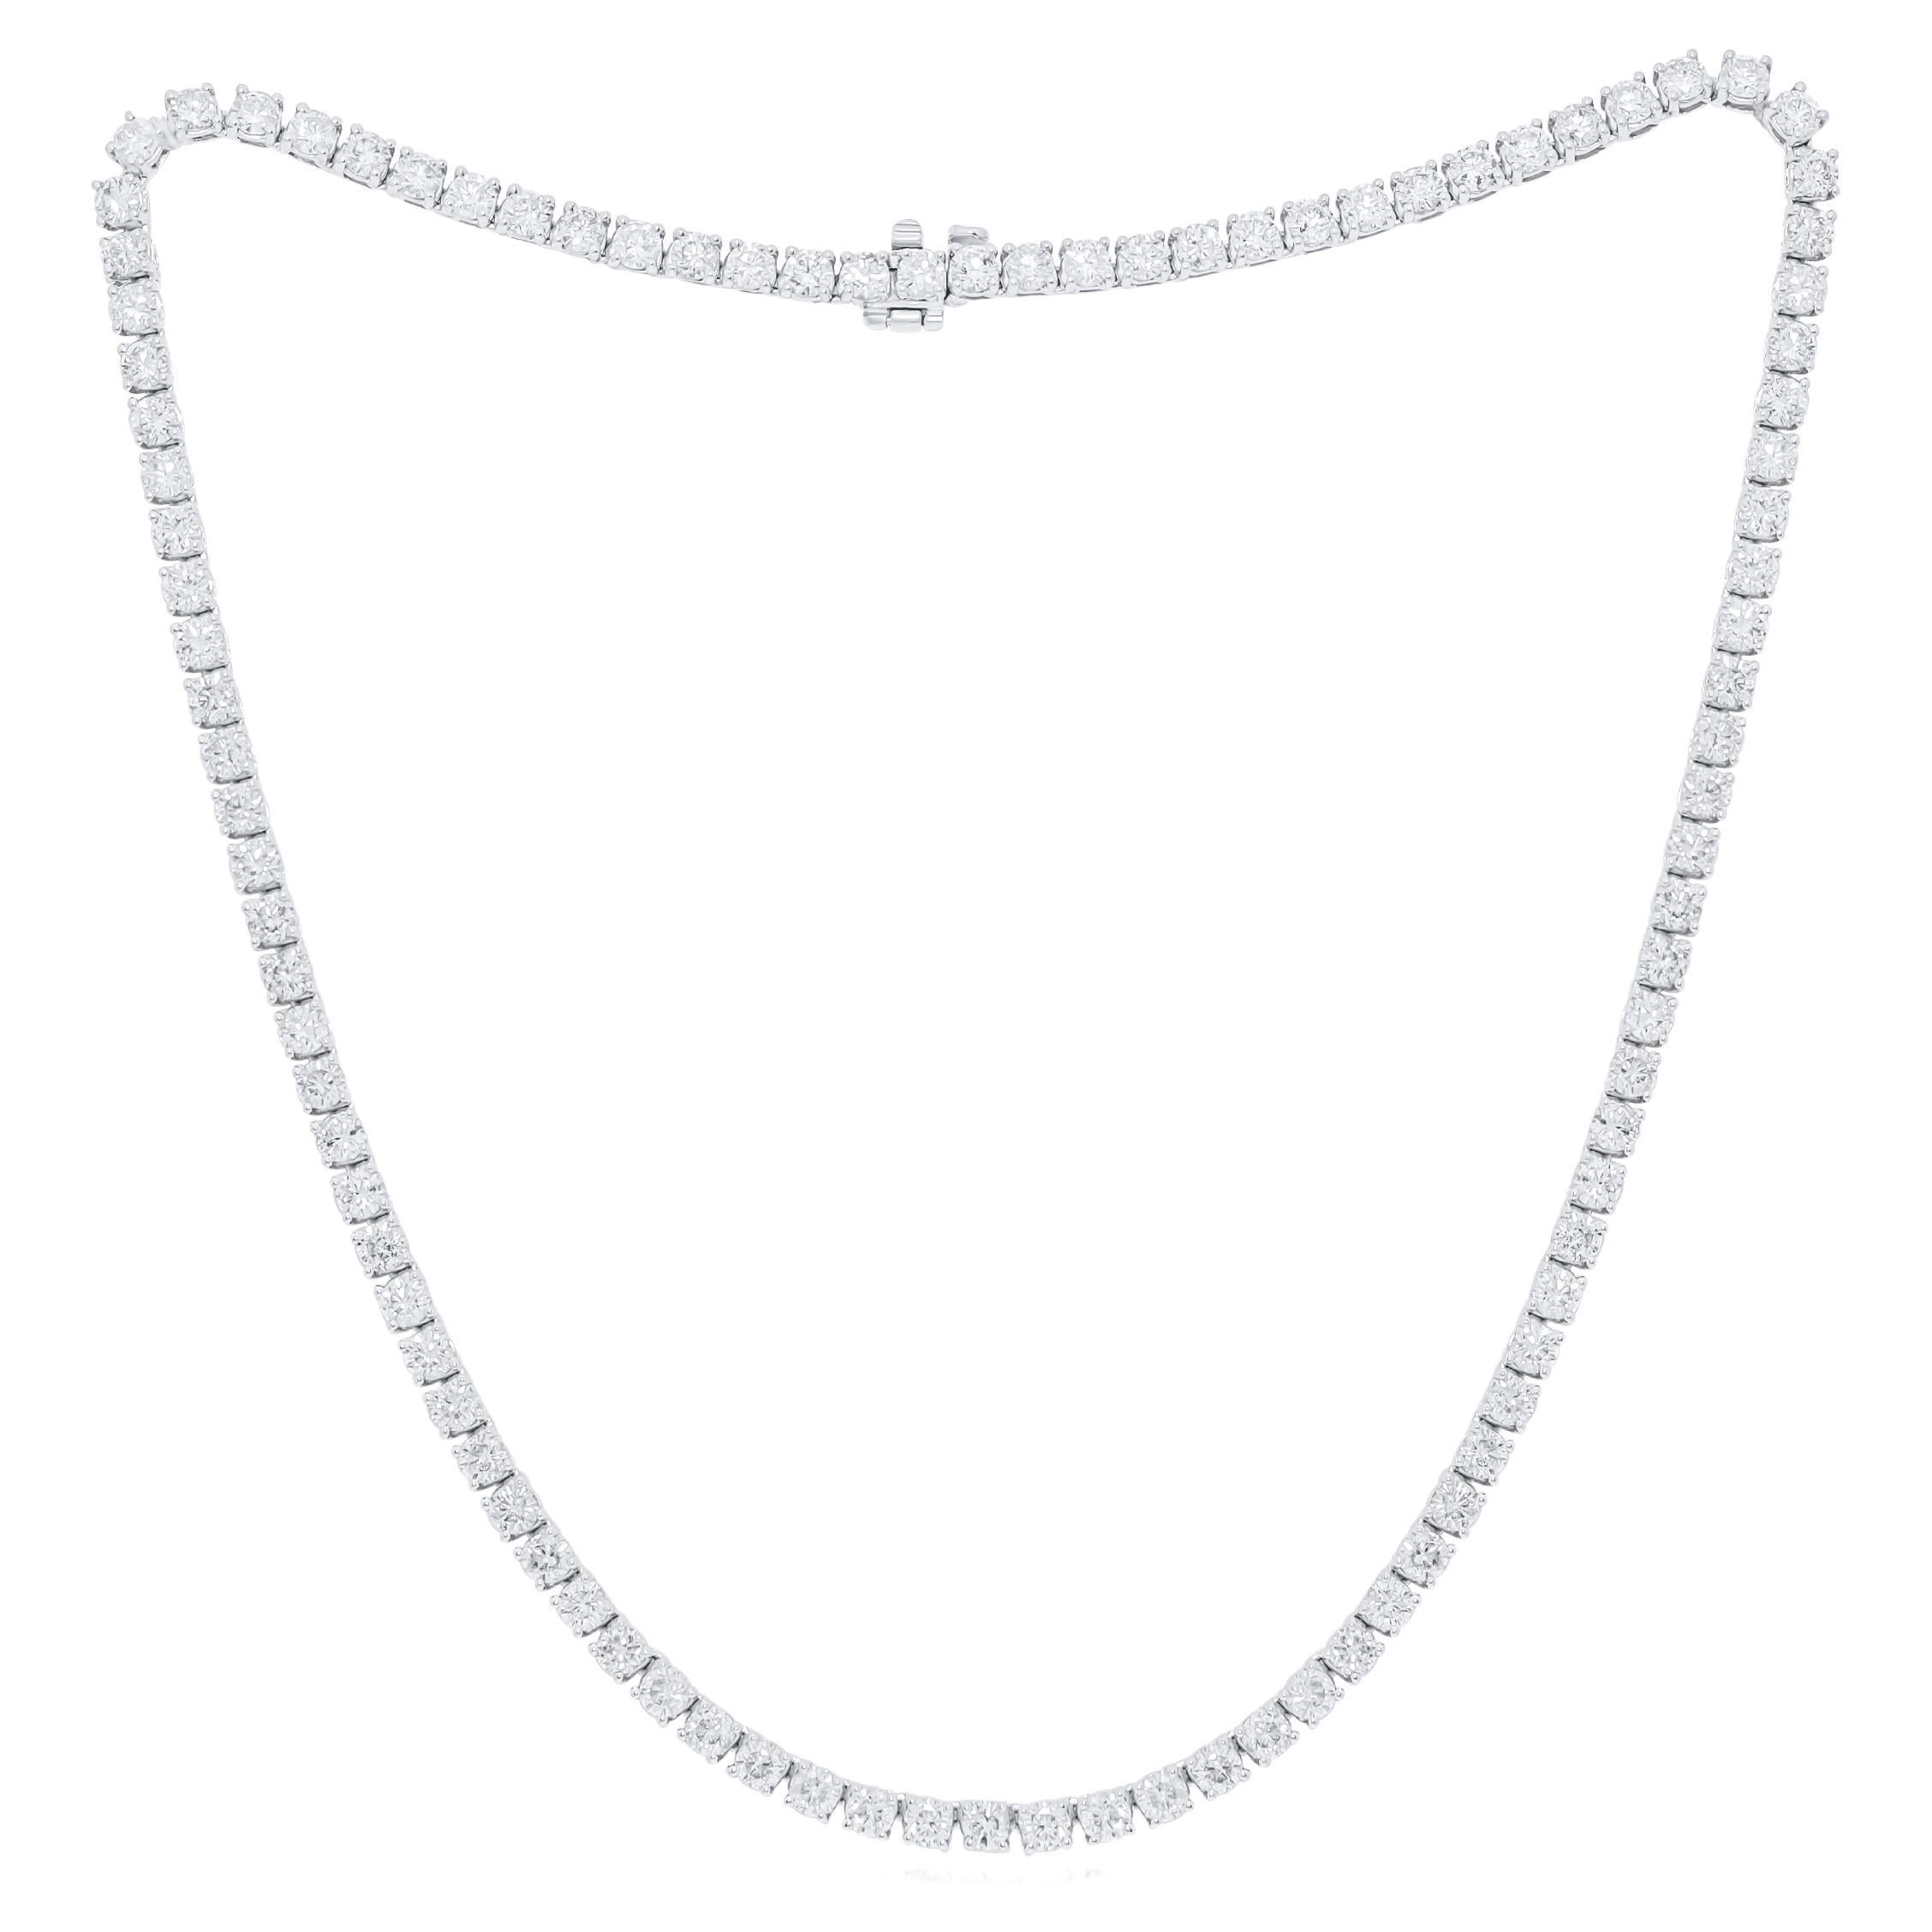 Diana M. Custom  18k White Gold, 16.5" 15.15 Cts 4 Prong Diamond Necklace  For Sale